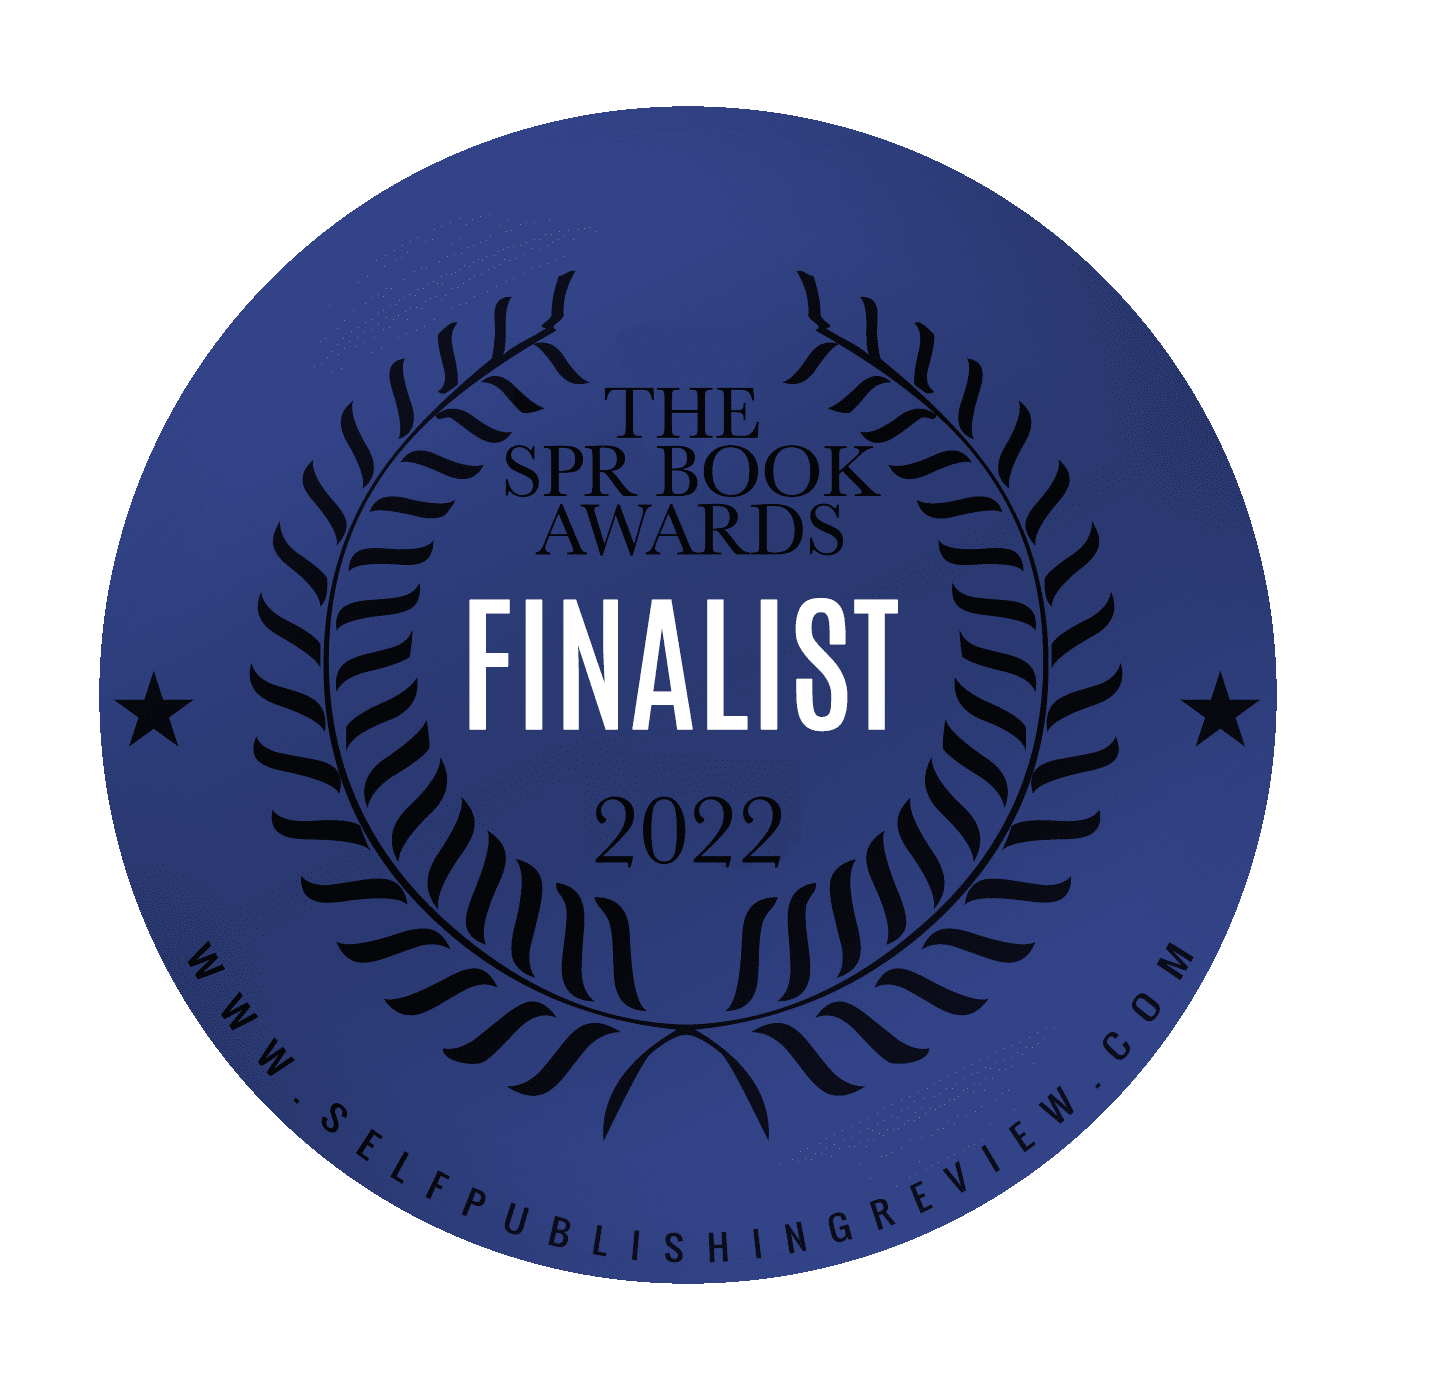 Self-Publishing Review Book Awards Finalist (2022)